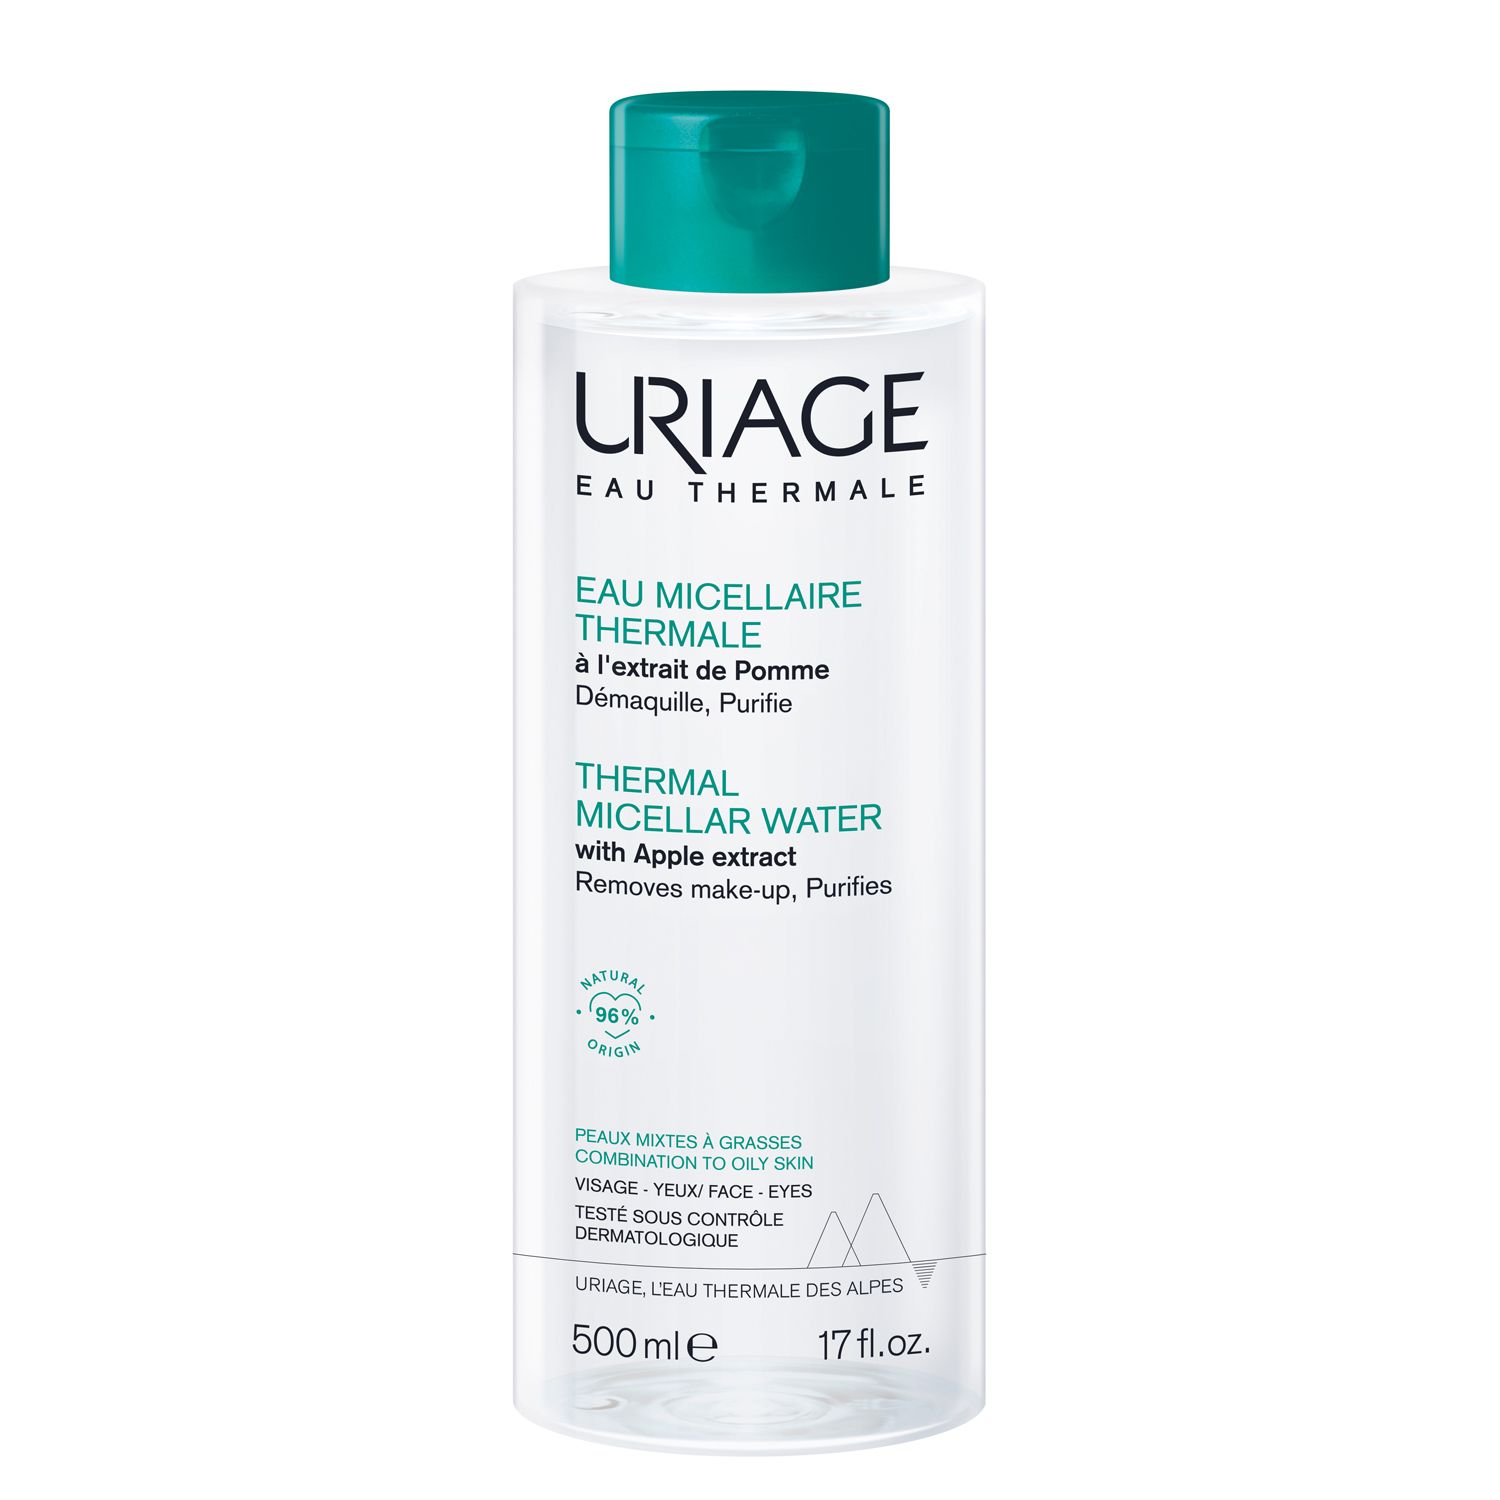 URIAGE EAU MICELLAIRE THERMALE